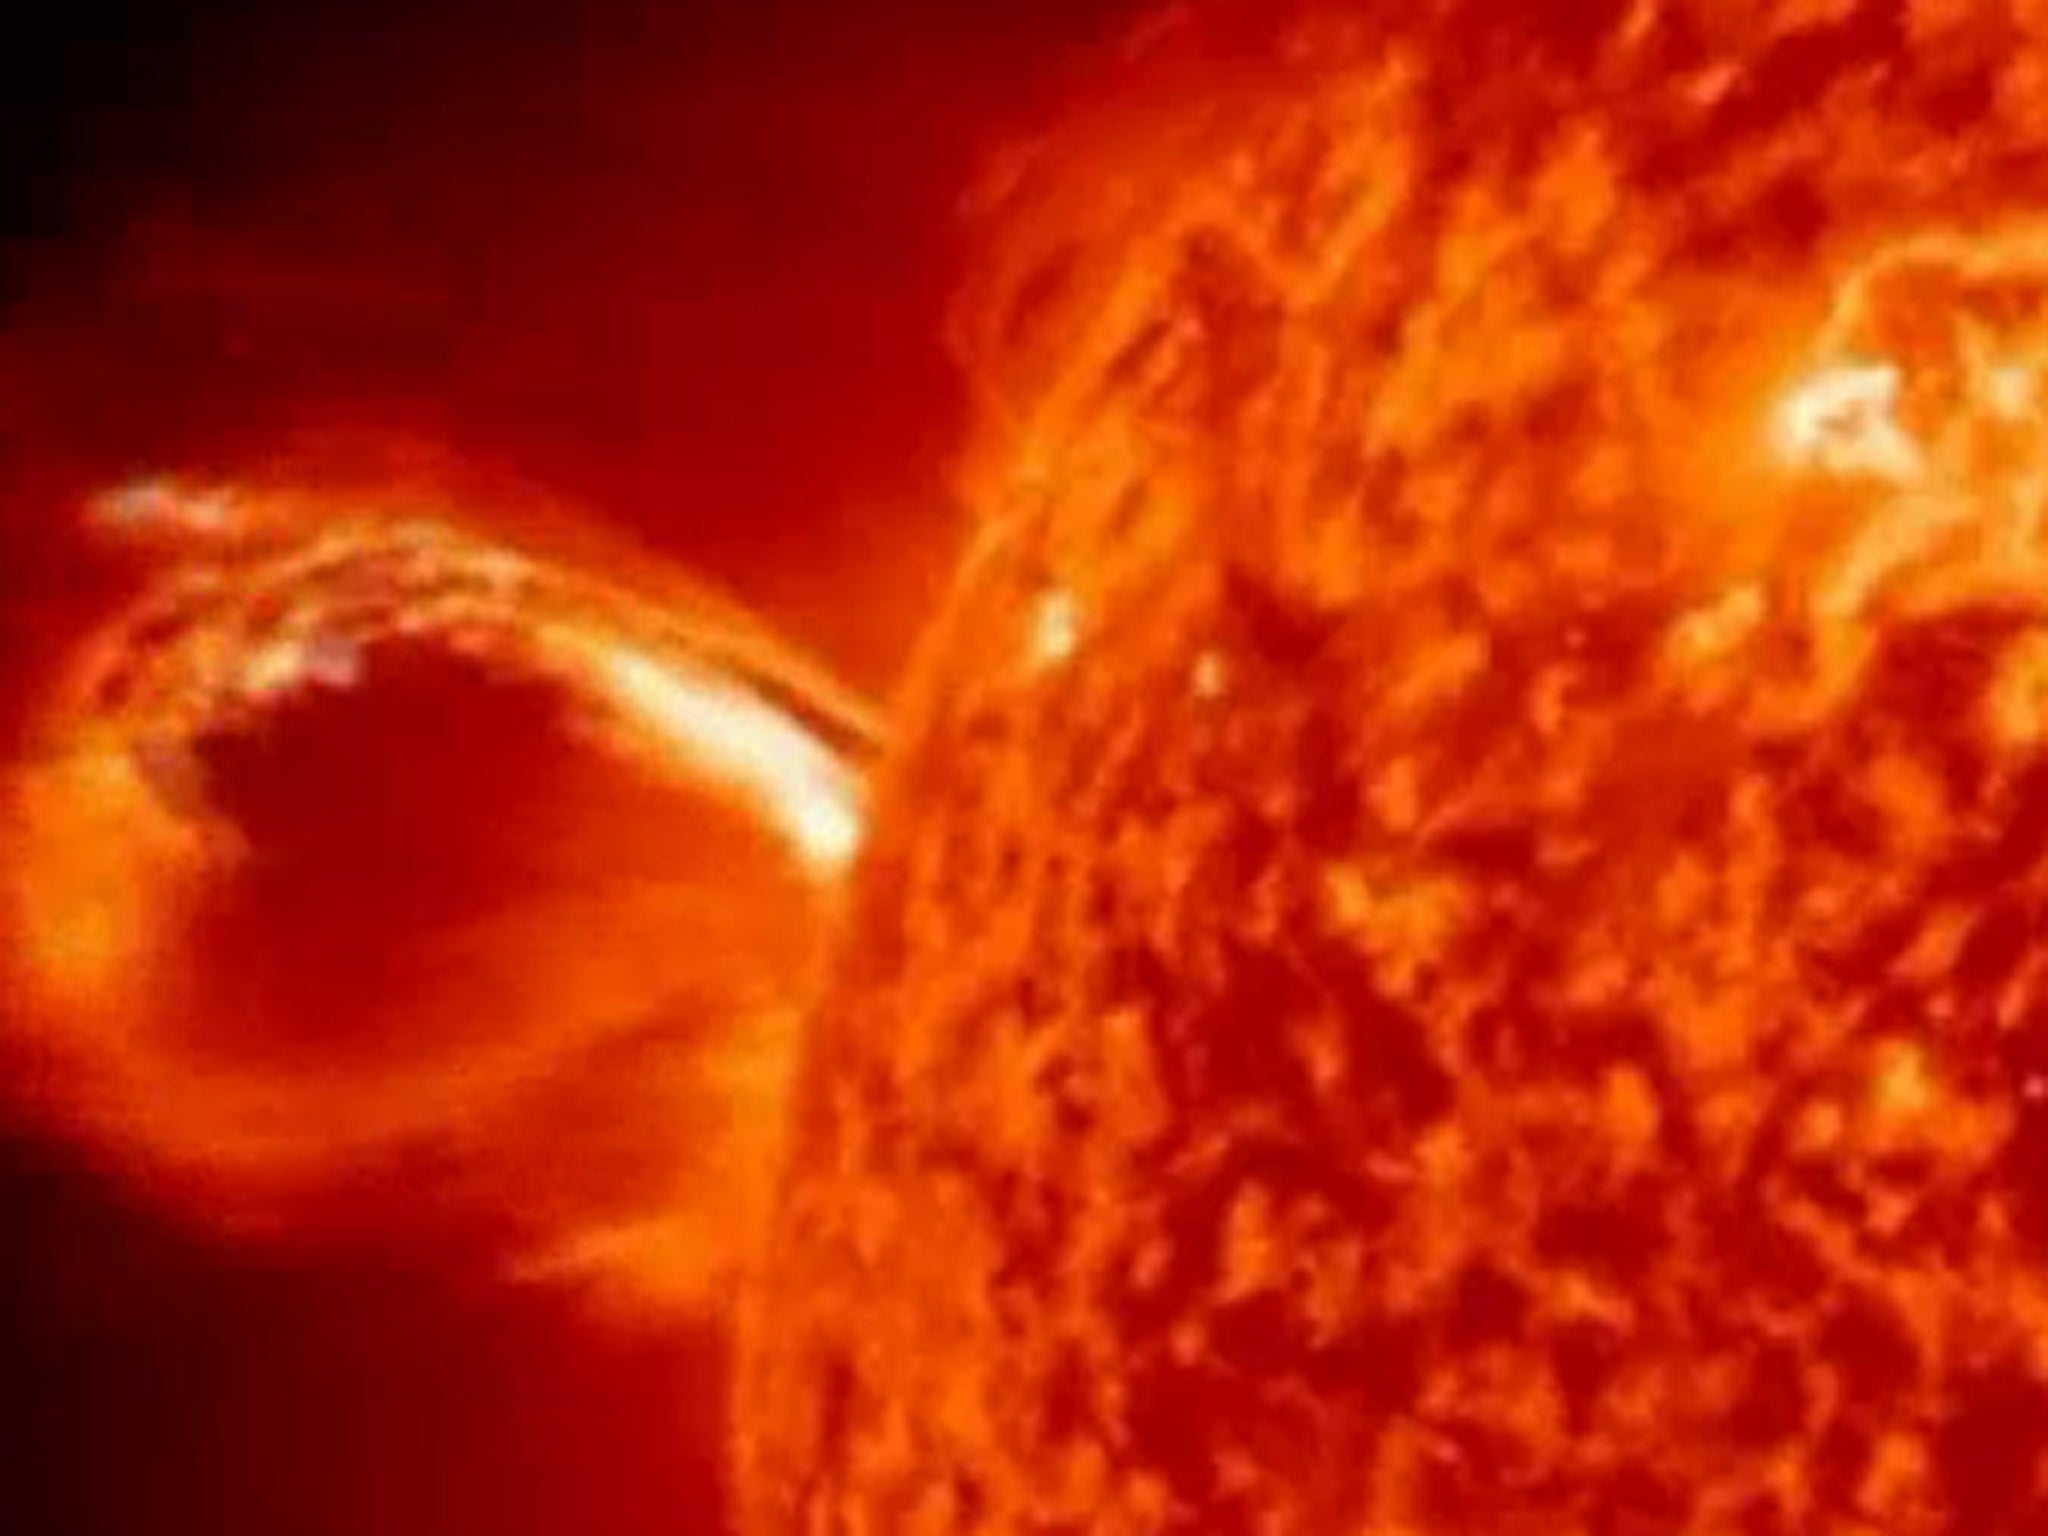 Video Nasa Releases Time Lapse Video Of Giant Sun Explosion The